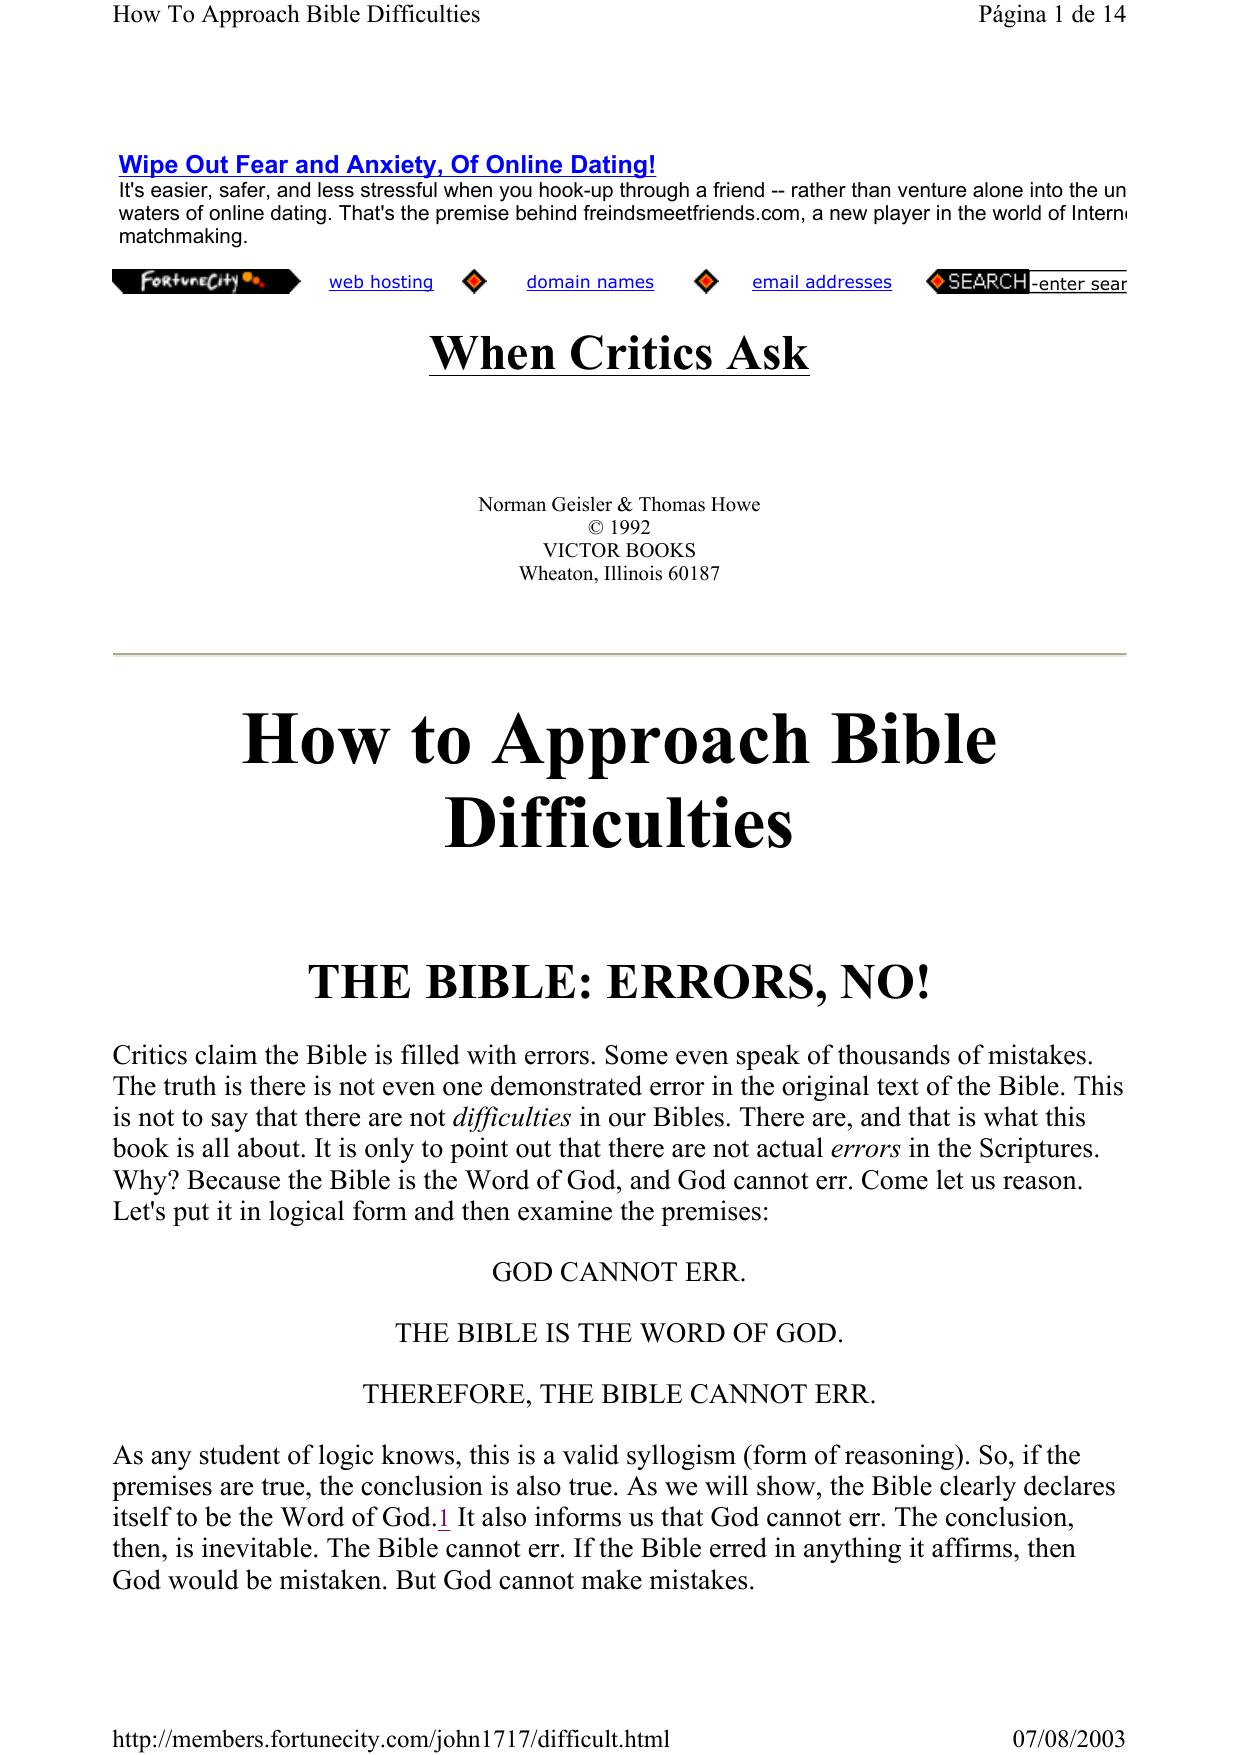 How to Approach Bible Difficulties - Geisler by Norman Geisler